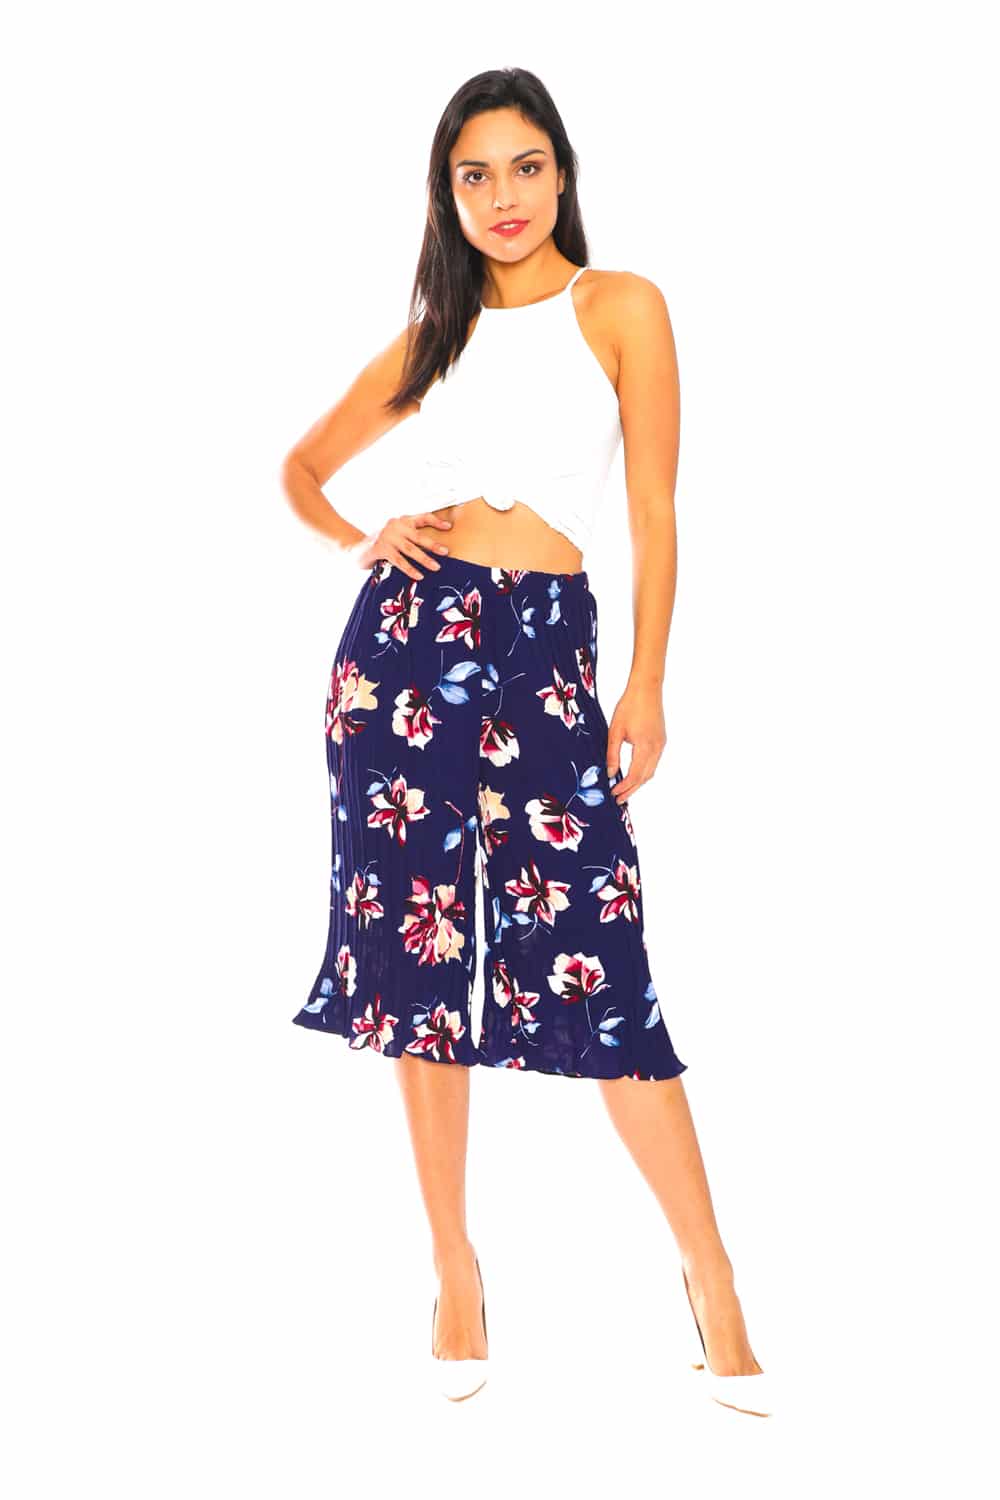 Floral Print Pants with Blue Leaves